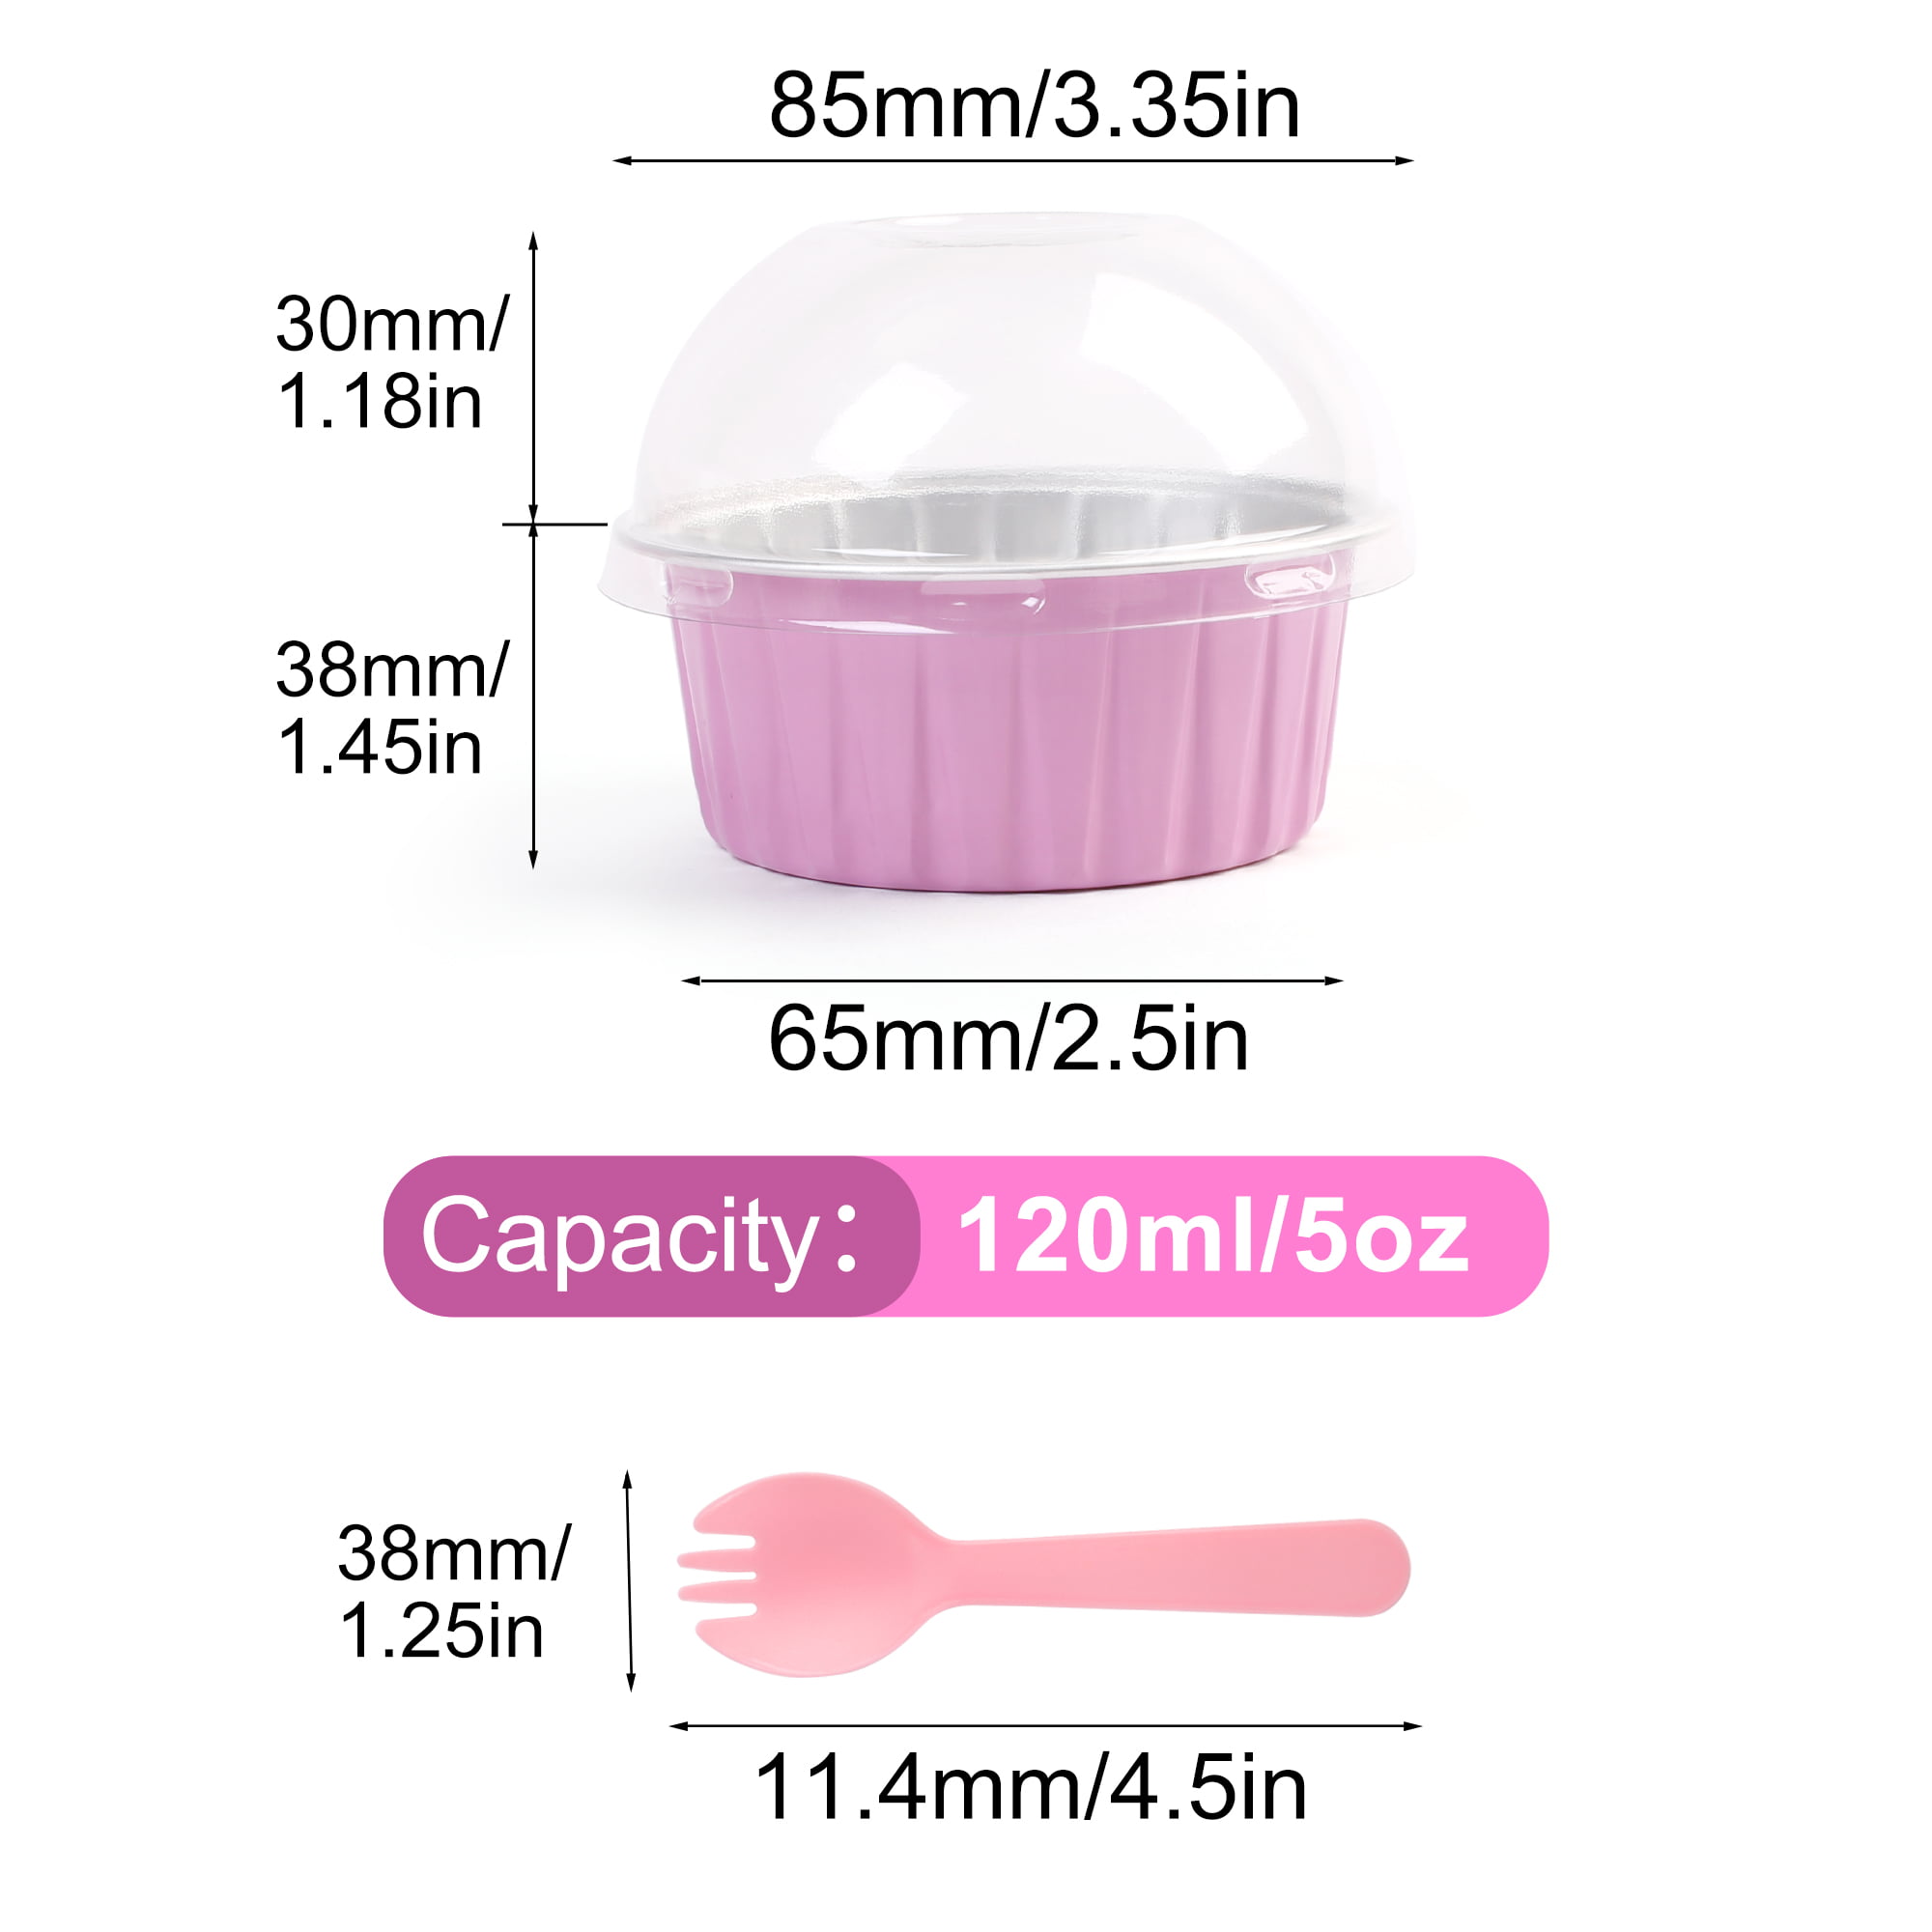 KING / JUMBO Foil Cupcake Liners / Baking Cups – Silver – Cake Connection